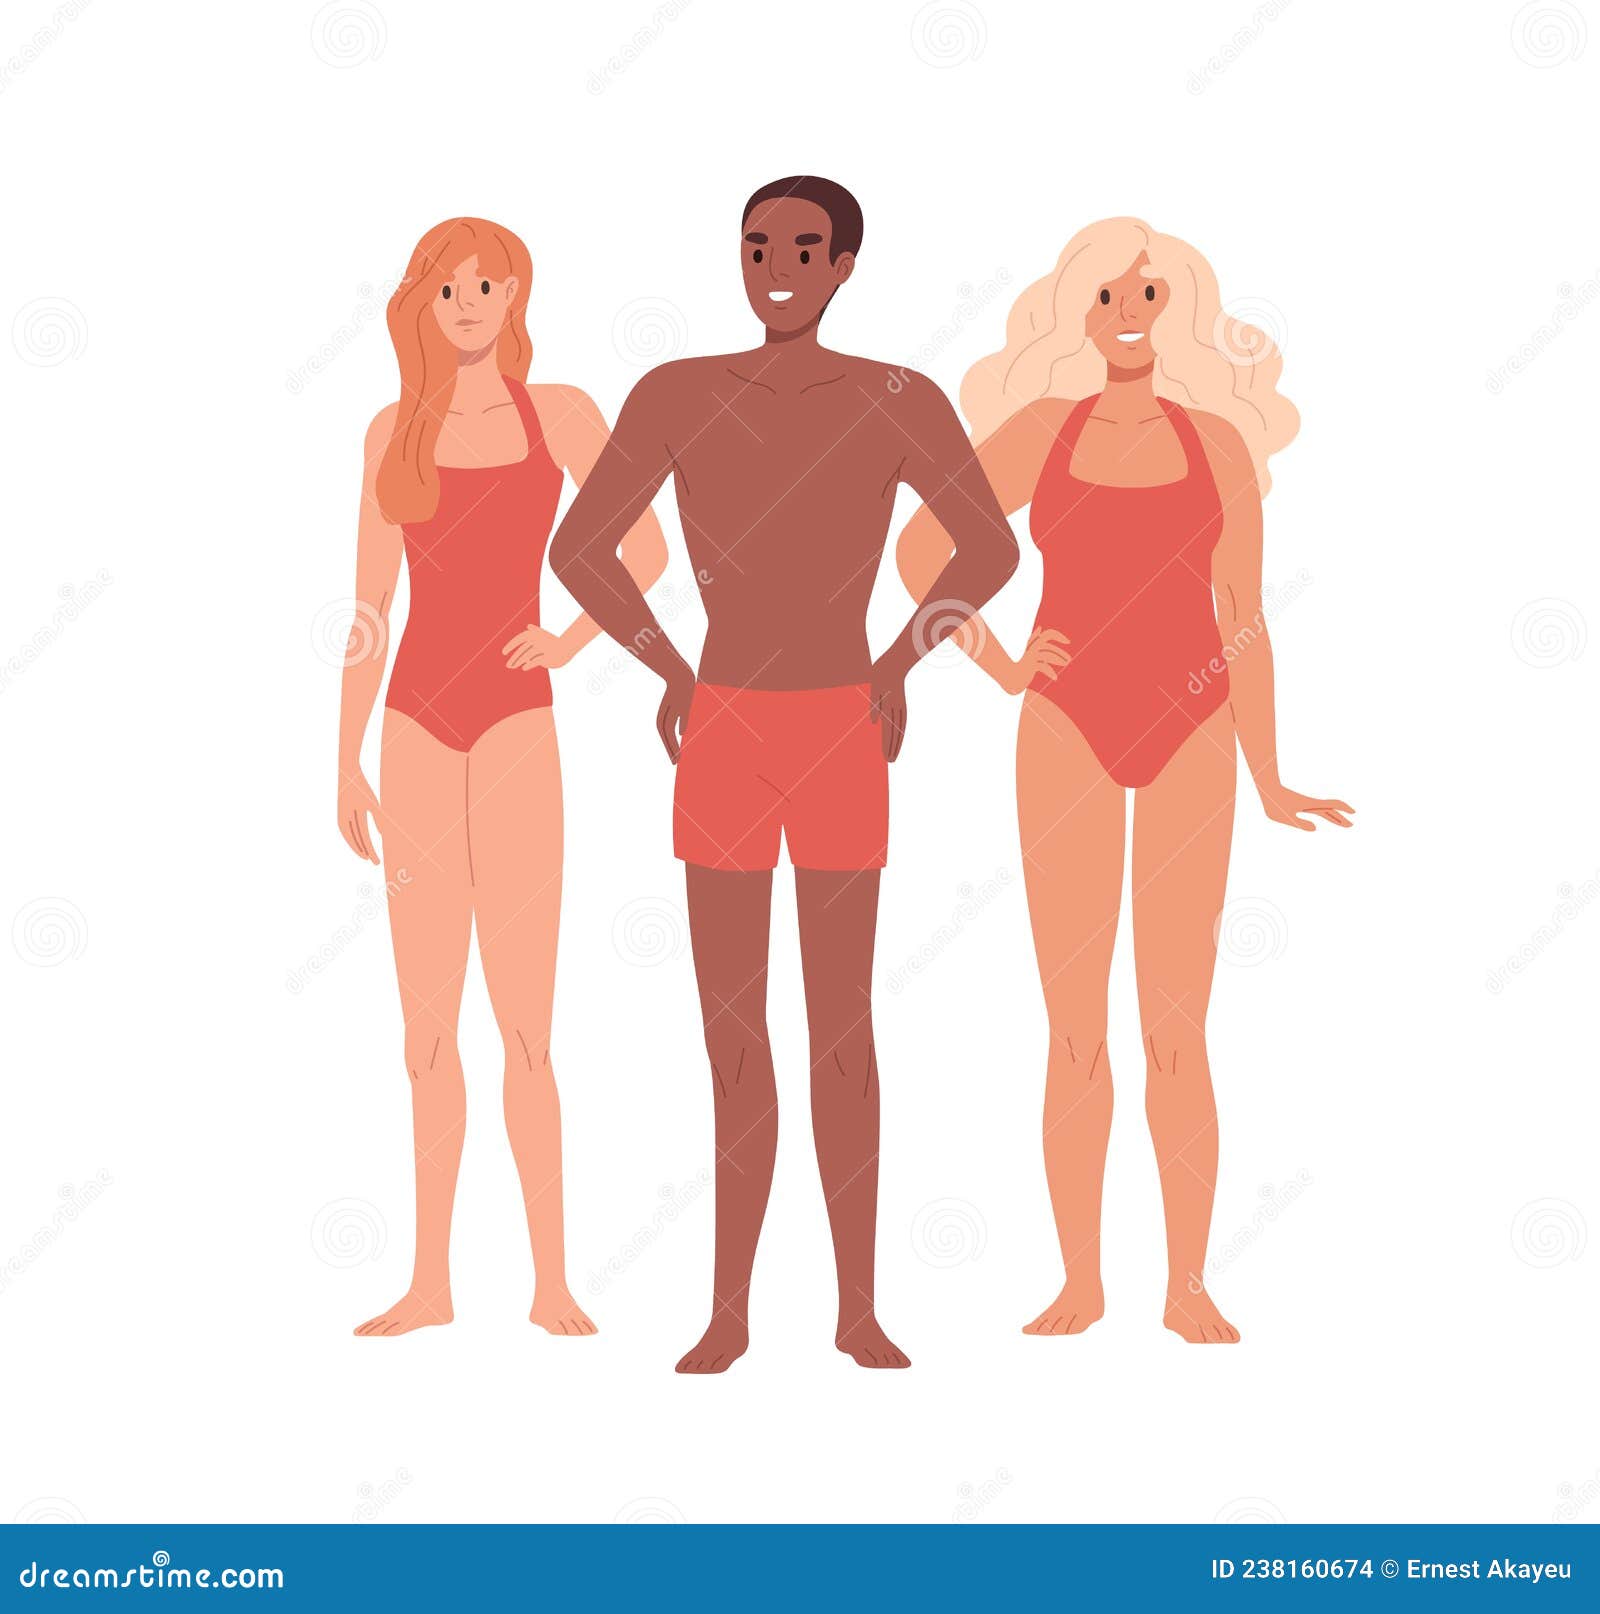 Male Swimsuits Stock Illustrations – 174 Male Swimsuits Stock Illustrations,  Vectors & Clipart - Dreamstime